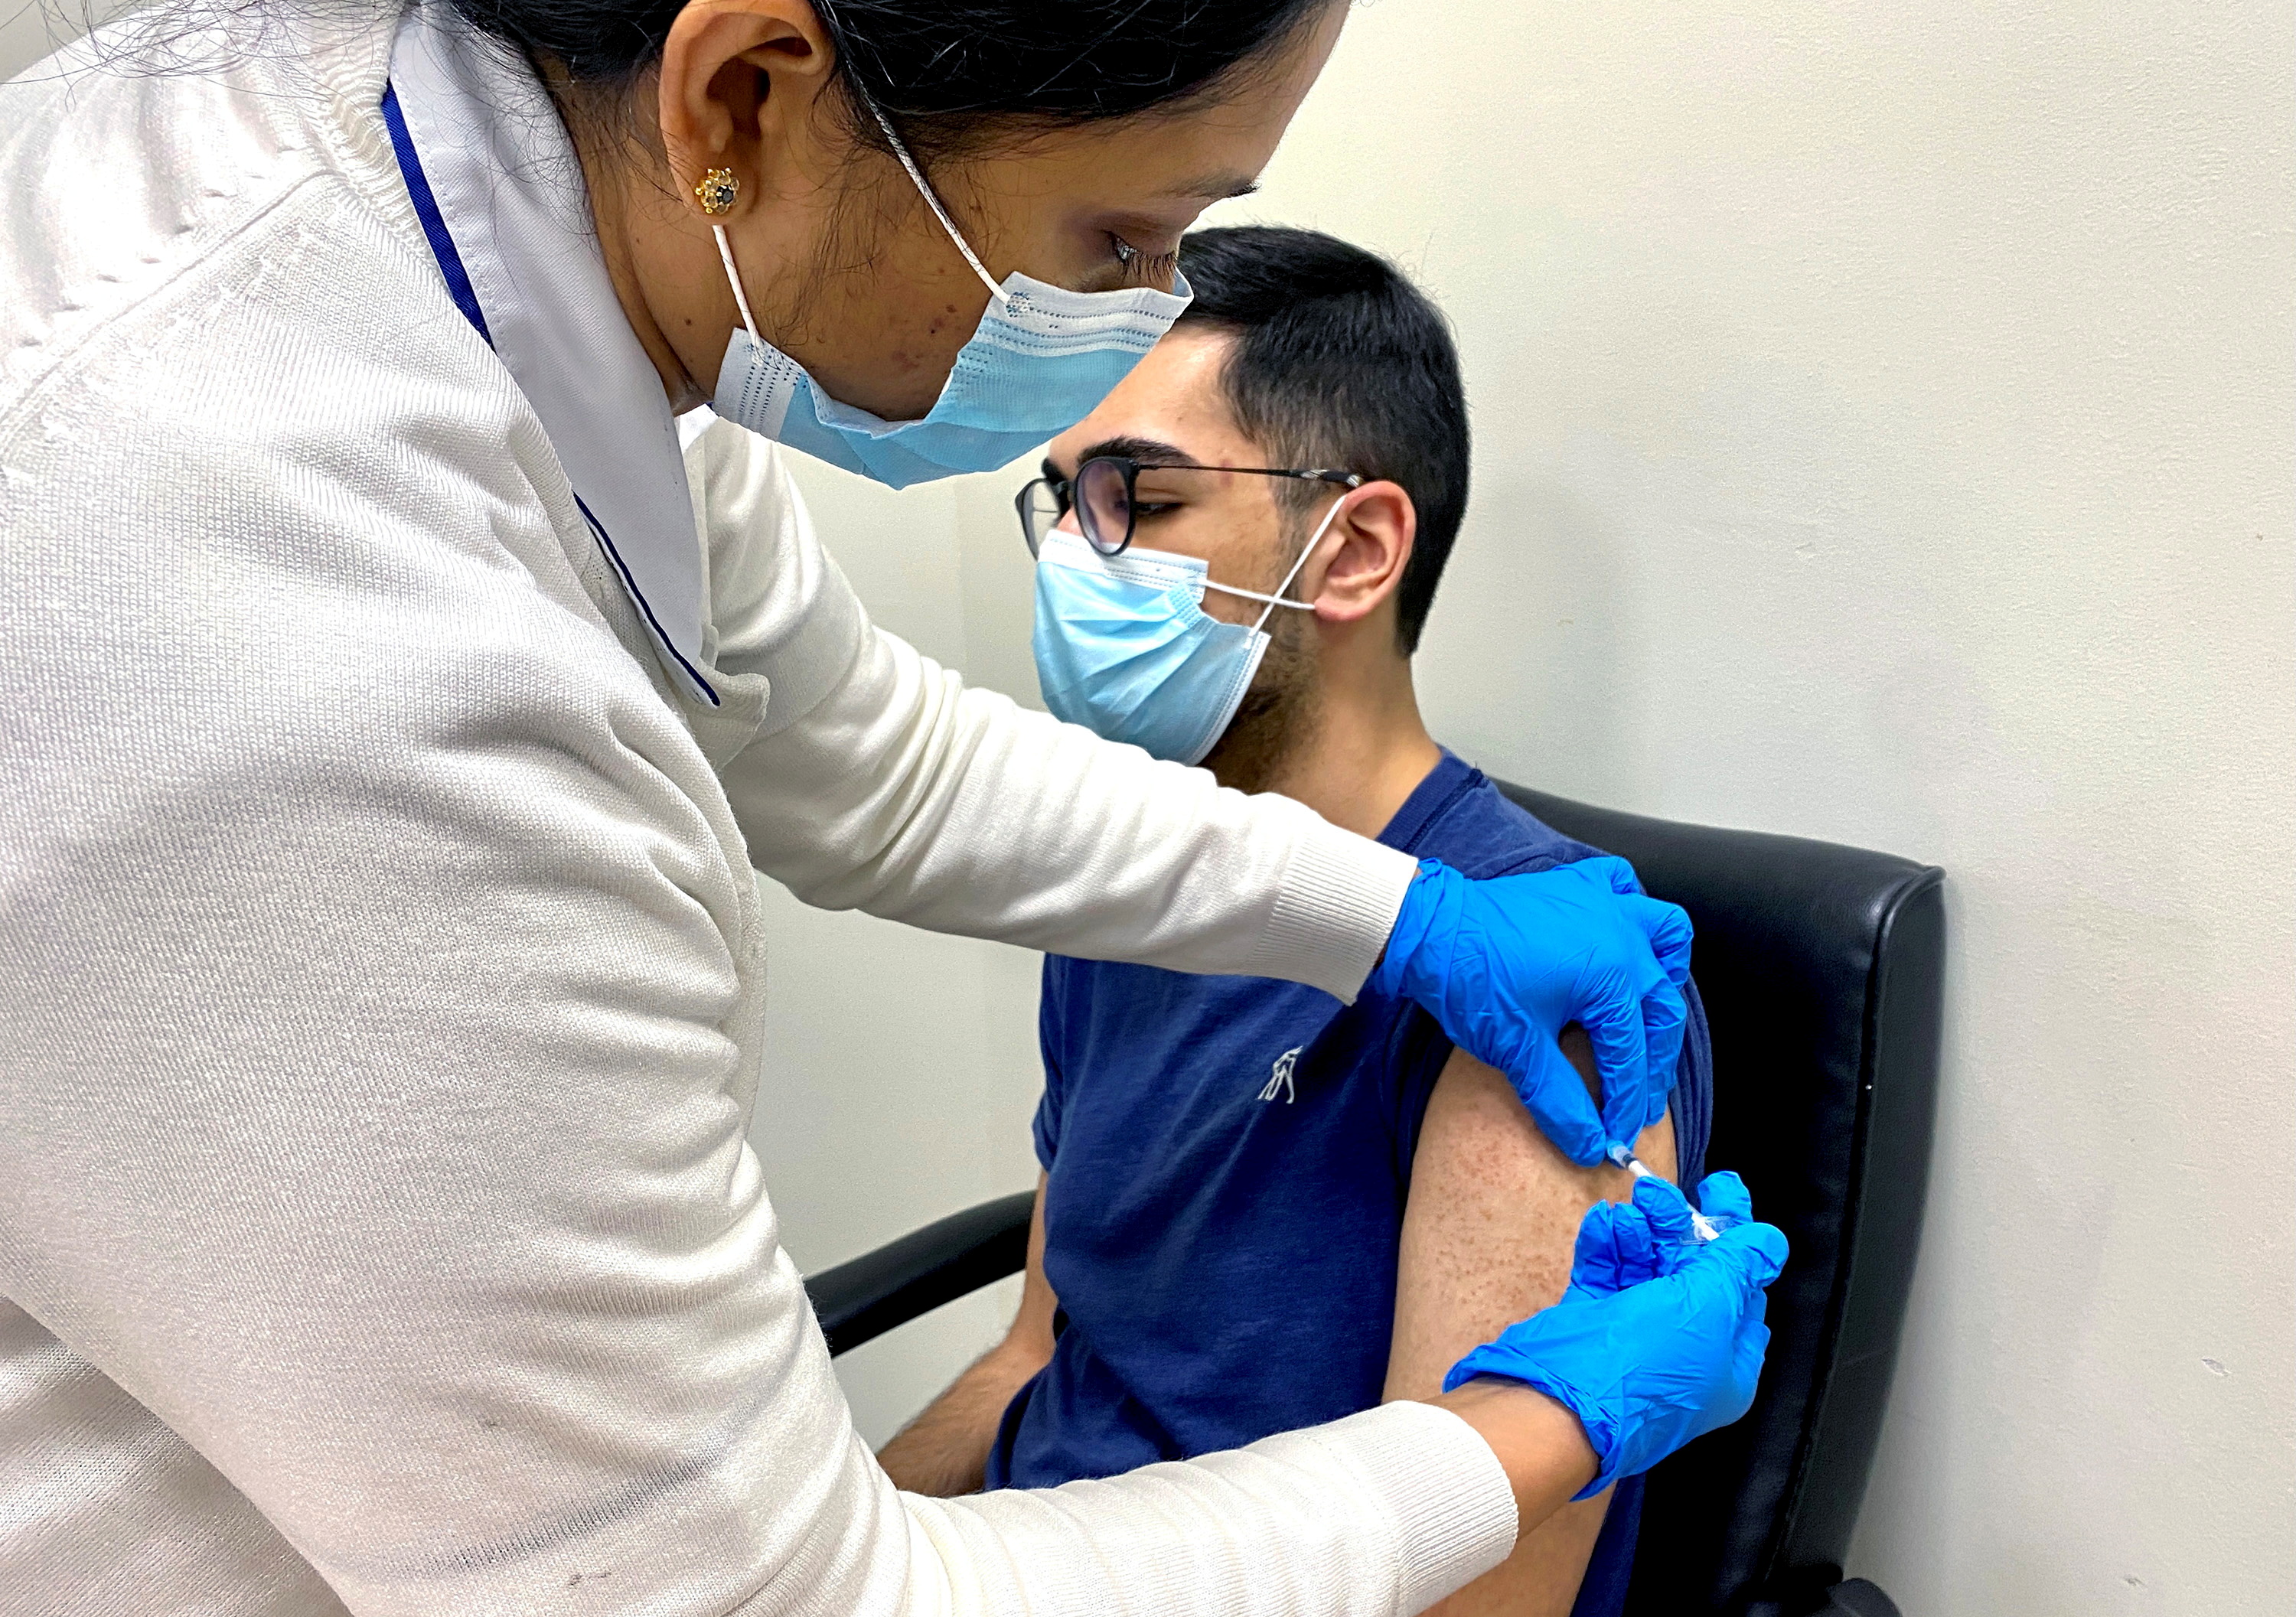 Dubai aims to vaccinate 70% of population by end of 2021